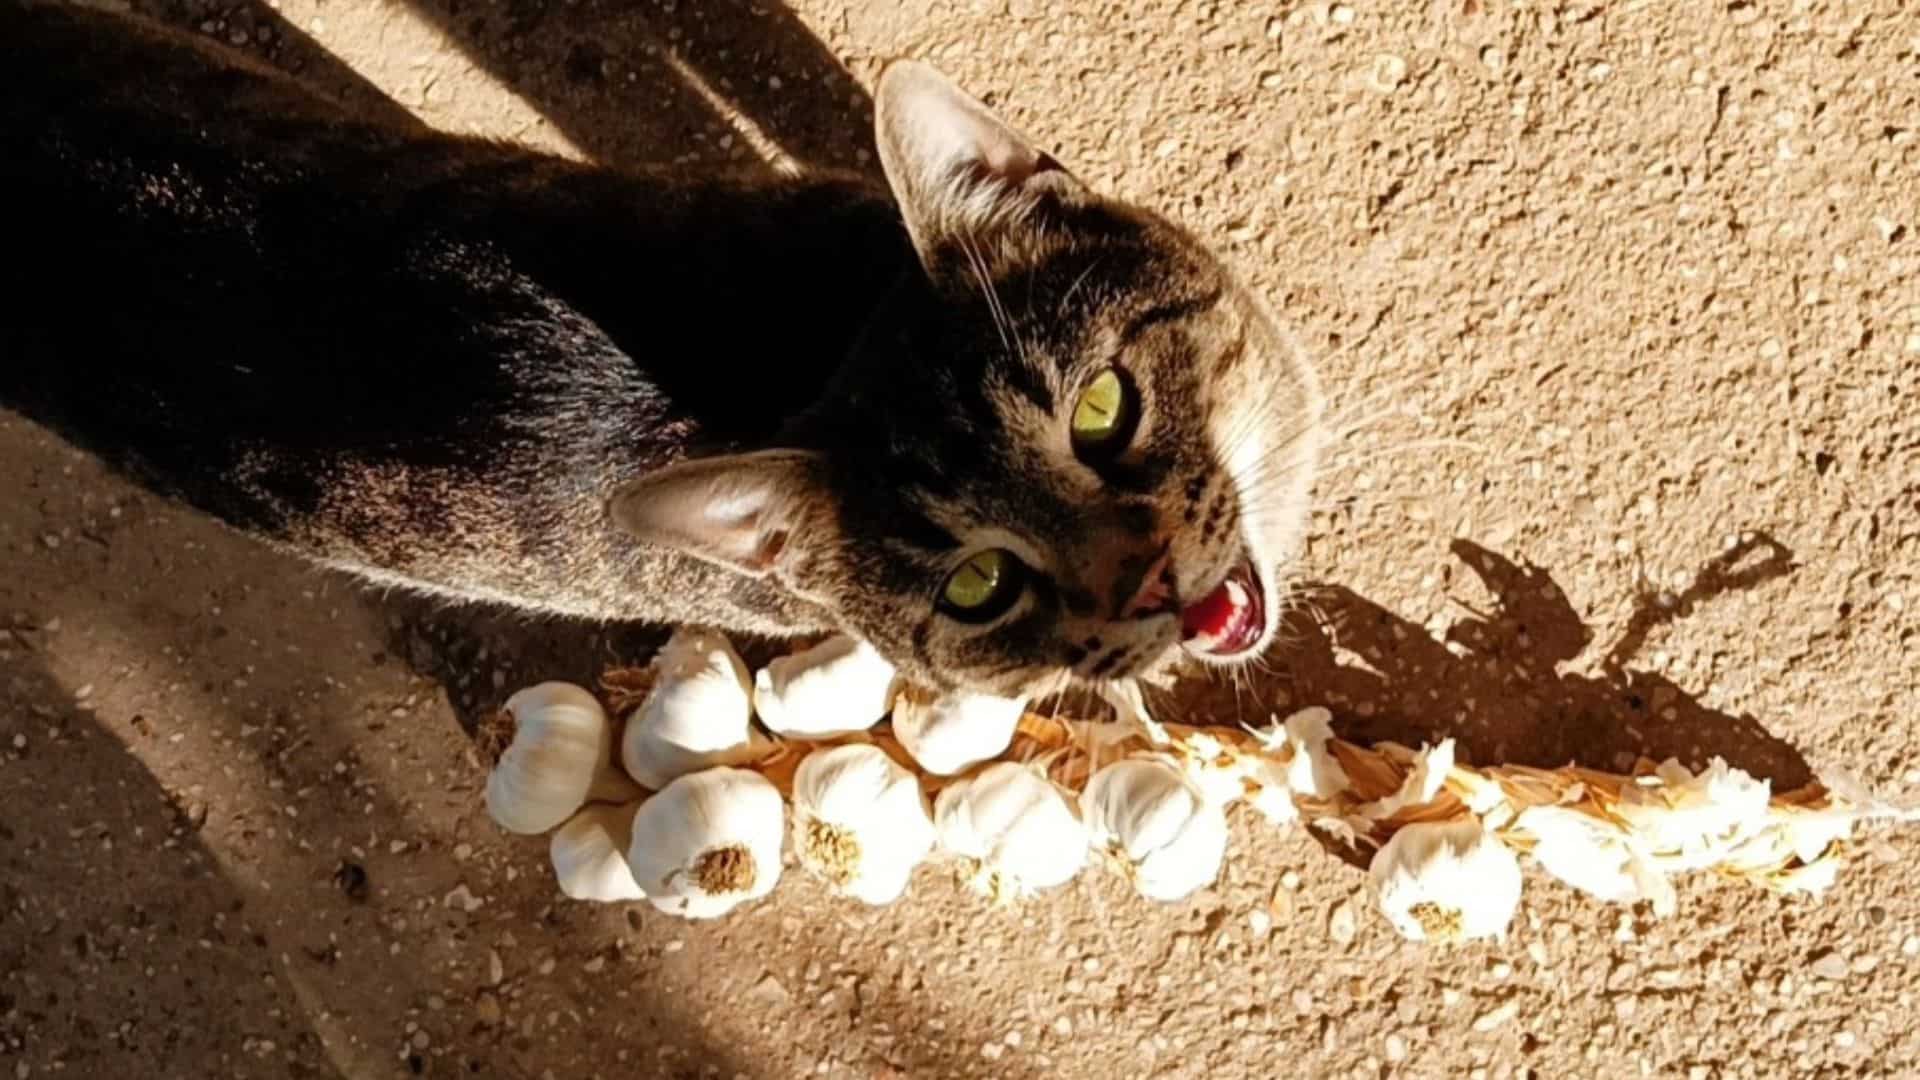 a beautiful cat is standing next to the garlic